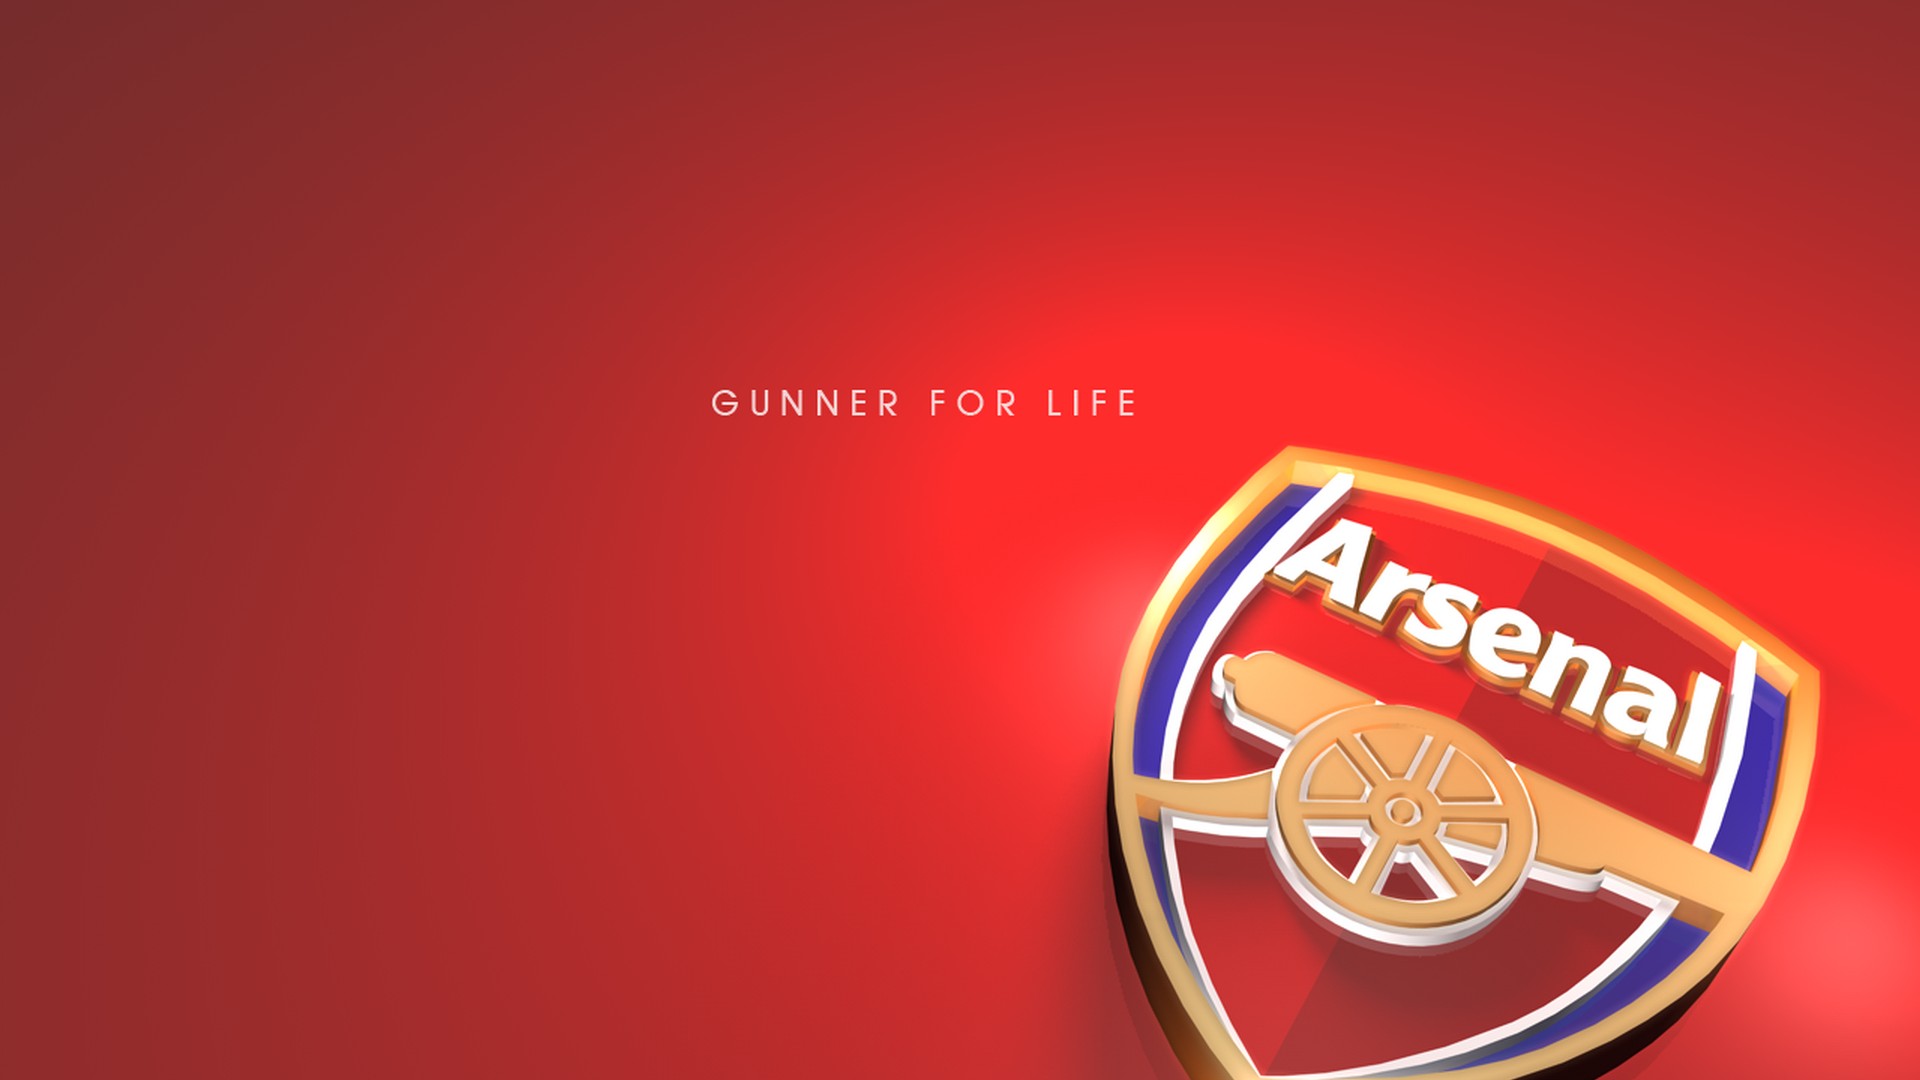 Arsenal Wallpaper For Mac with high-resolution 1920x1080 pixel. You can use this wallpaper for your Desktop Computers, Mac Screensavers, Windows Backgrounds, iPhone Wallpapers, Tablet or Android Lock screen and another Mobile device